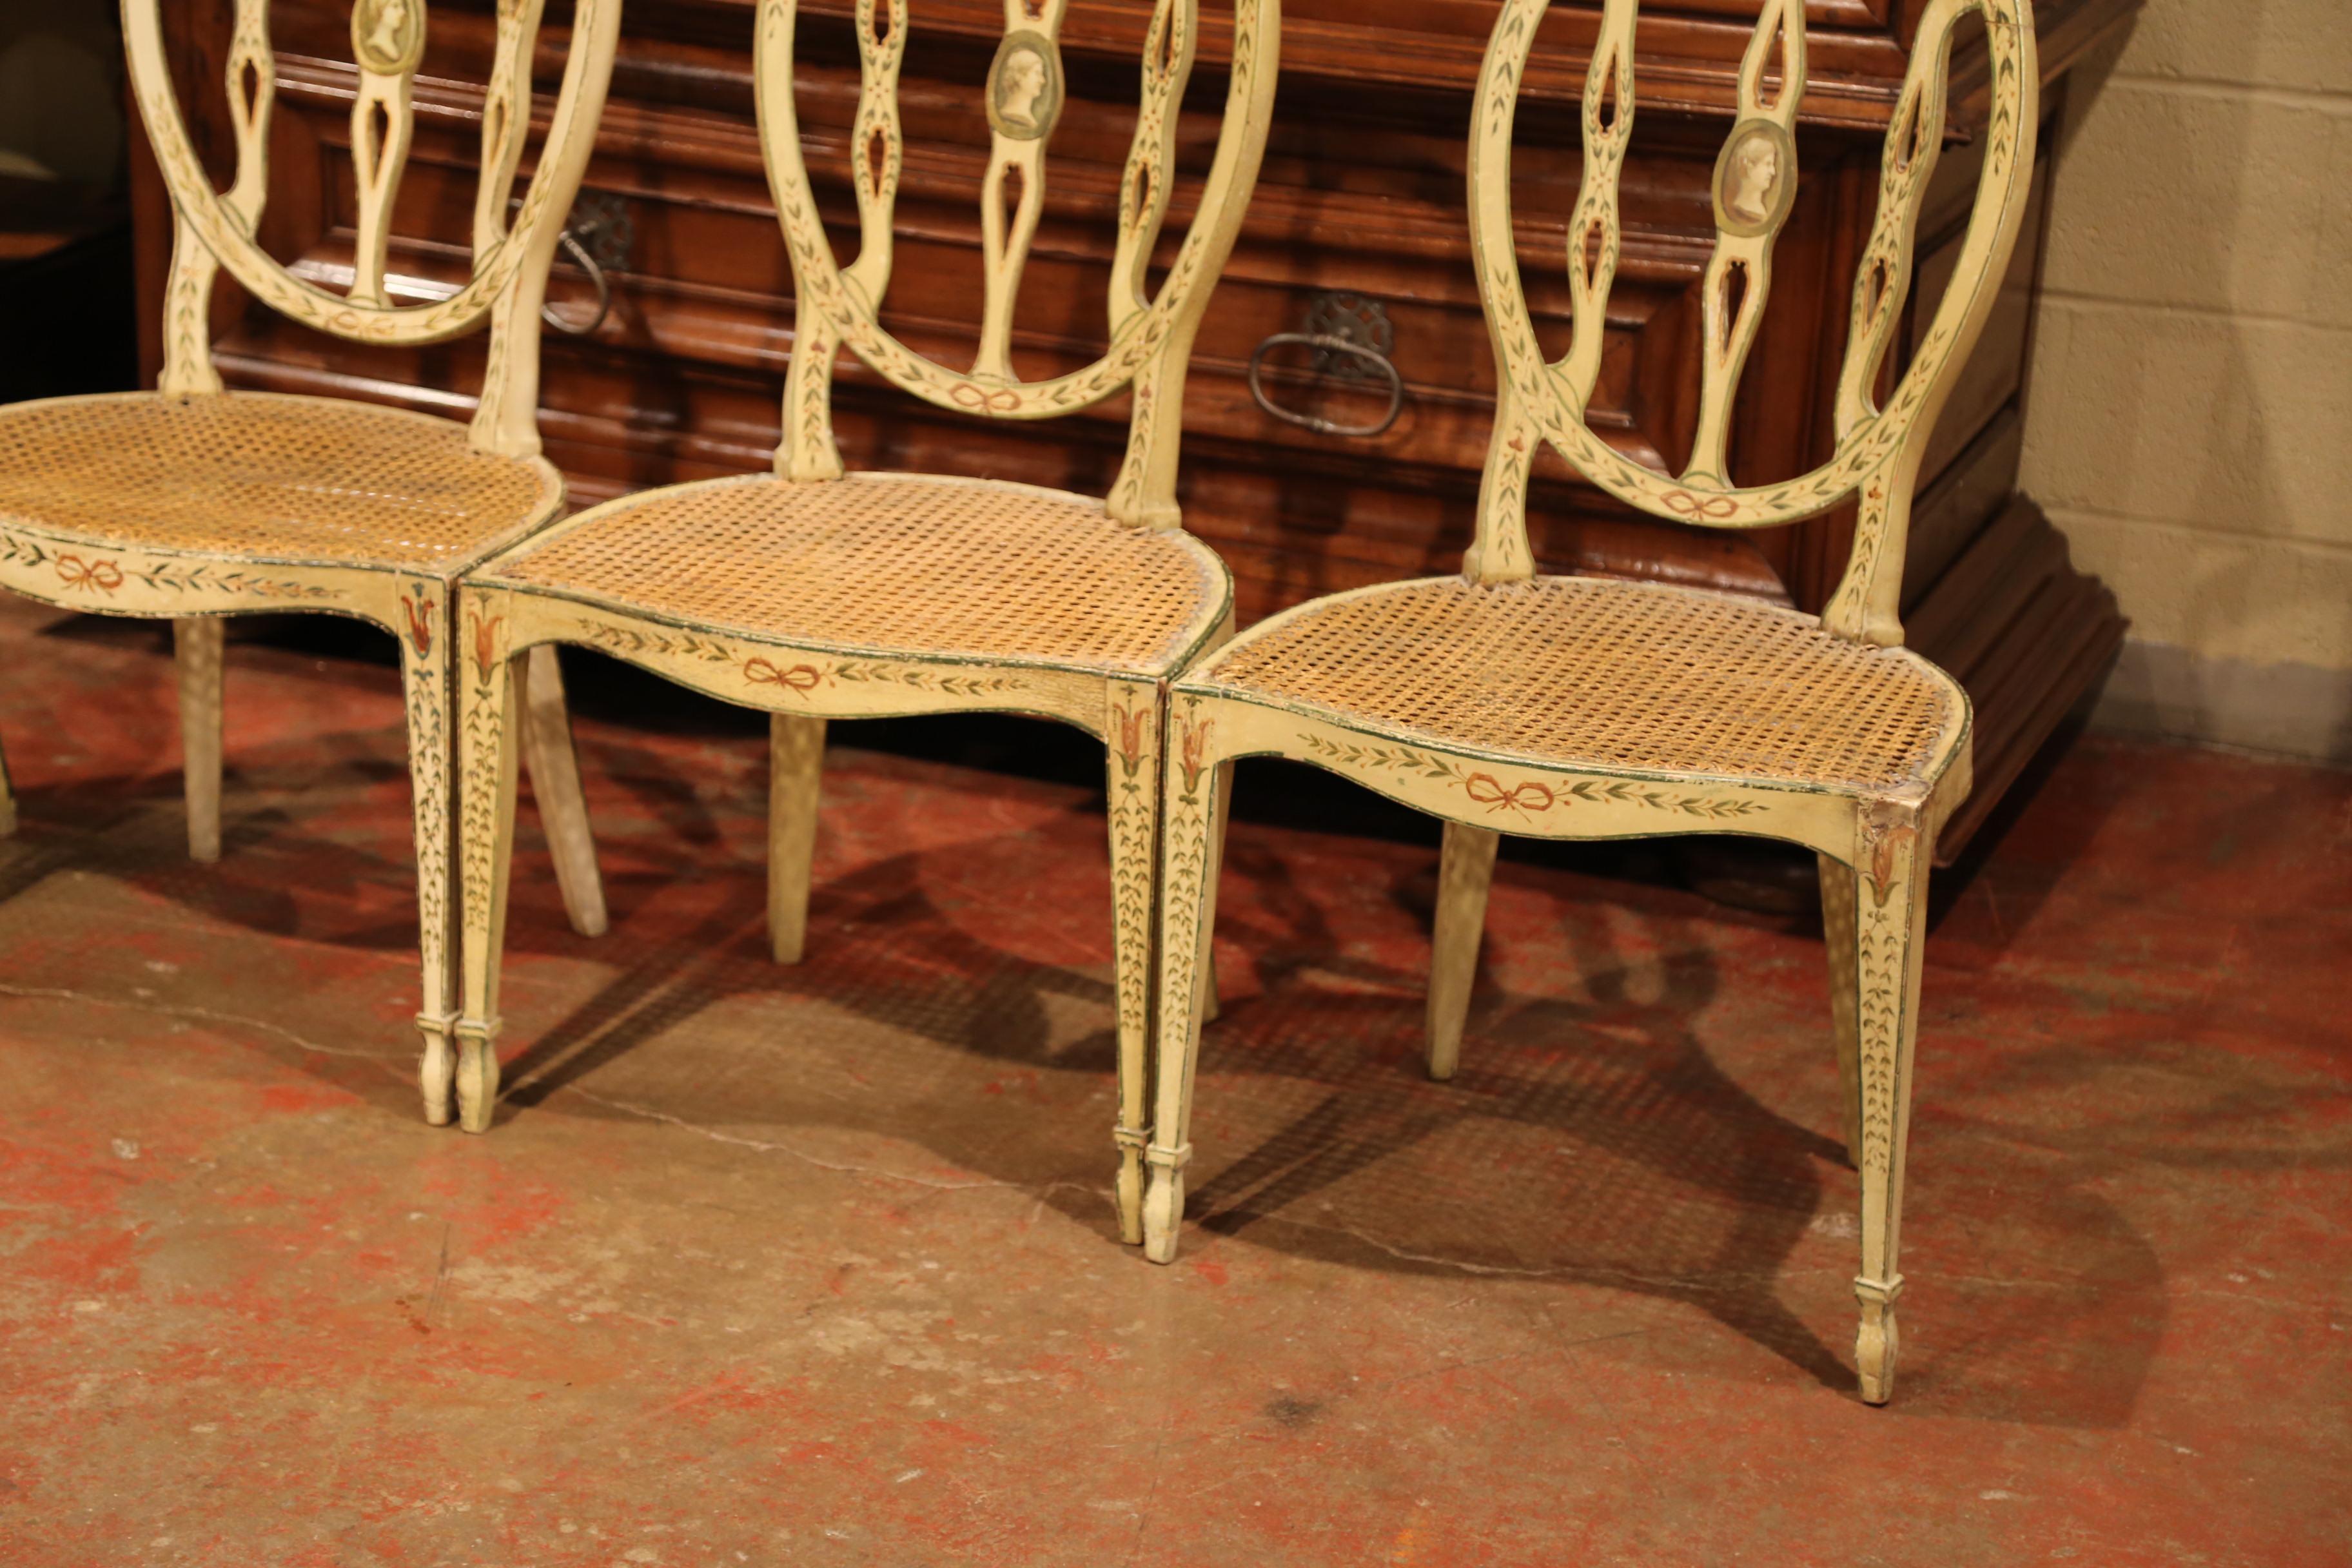 English Set of Four Mid-19th Century Hepplewhite Style Painted Chairs with Cane Seat